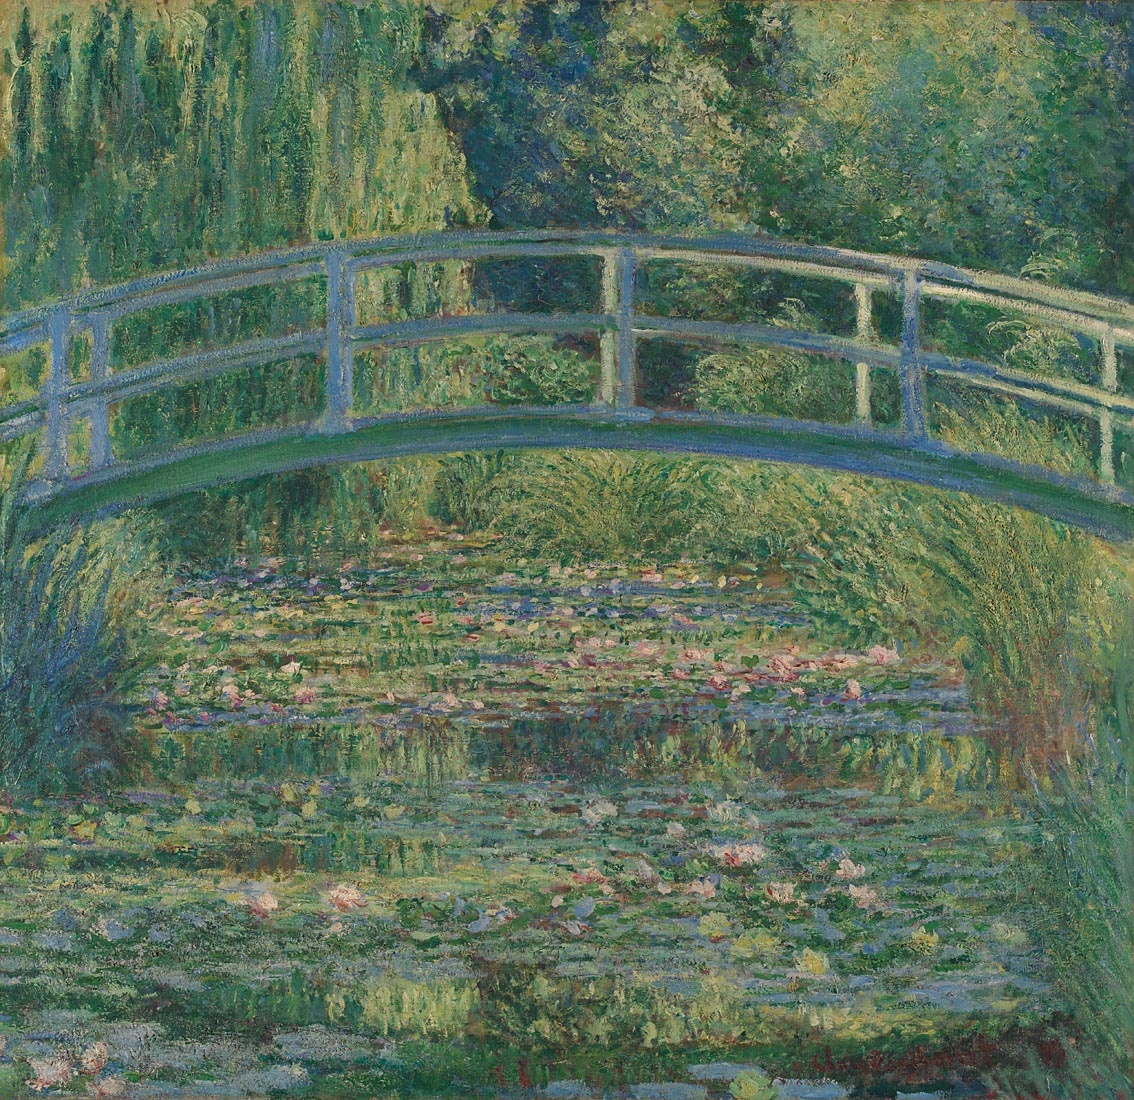 A moment of peace and quiet 🍃

In 1893 Monet bought a plot of land next to his house in Giverny. He wanted to create a water garden ‘both for the pleasure of the eye and for the purpose of having subjects to paint': bit.ly/3BQOLQA